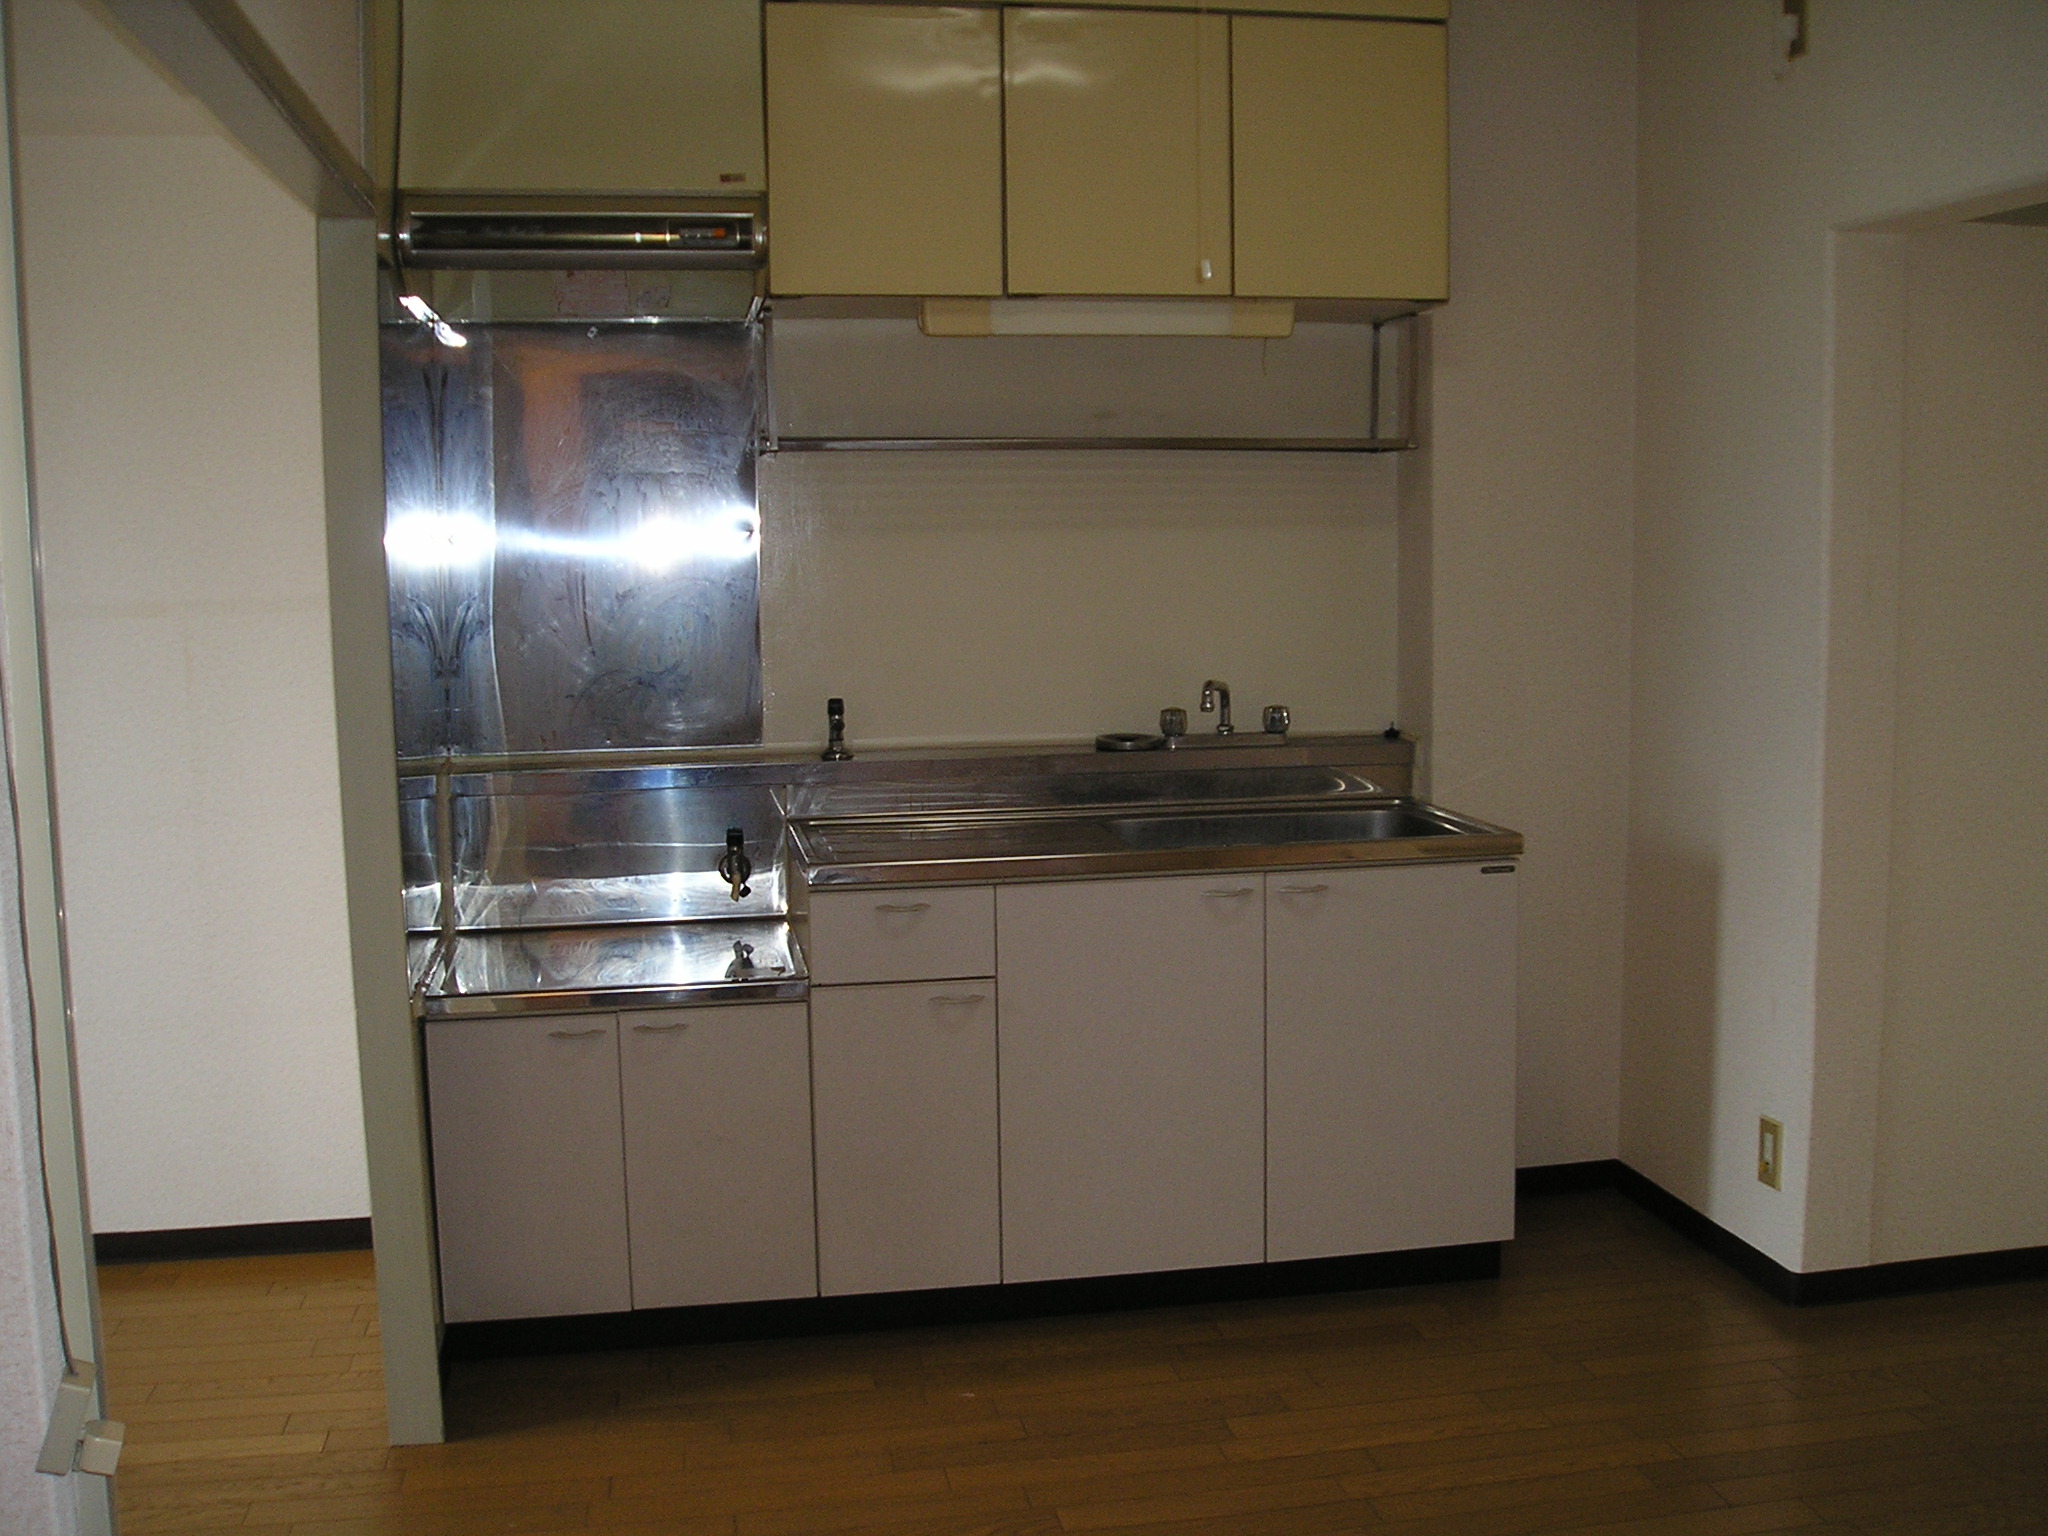 Kitchen. Two-burner gas stove installation Allowed.